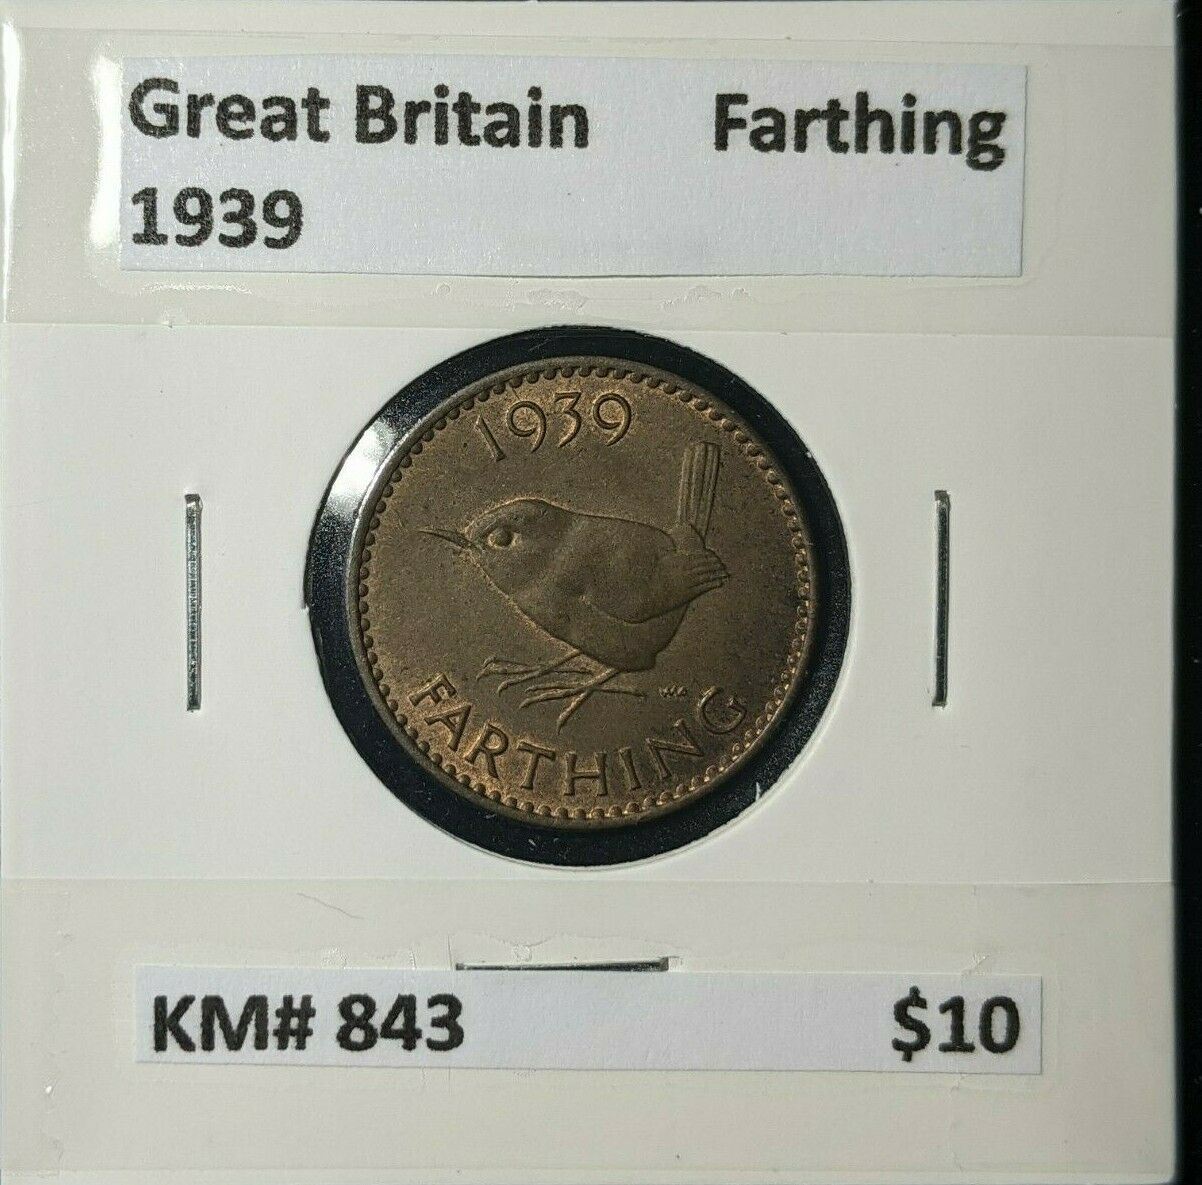 Great Britain 1939 1/4d Farthing KM# 843 #209